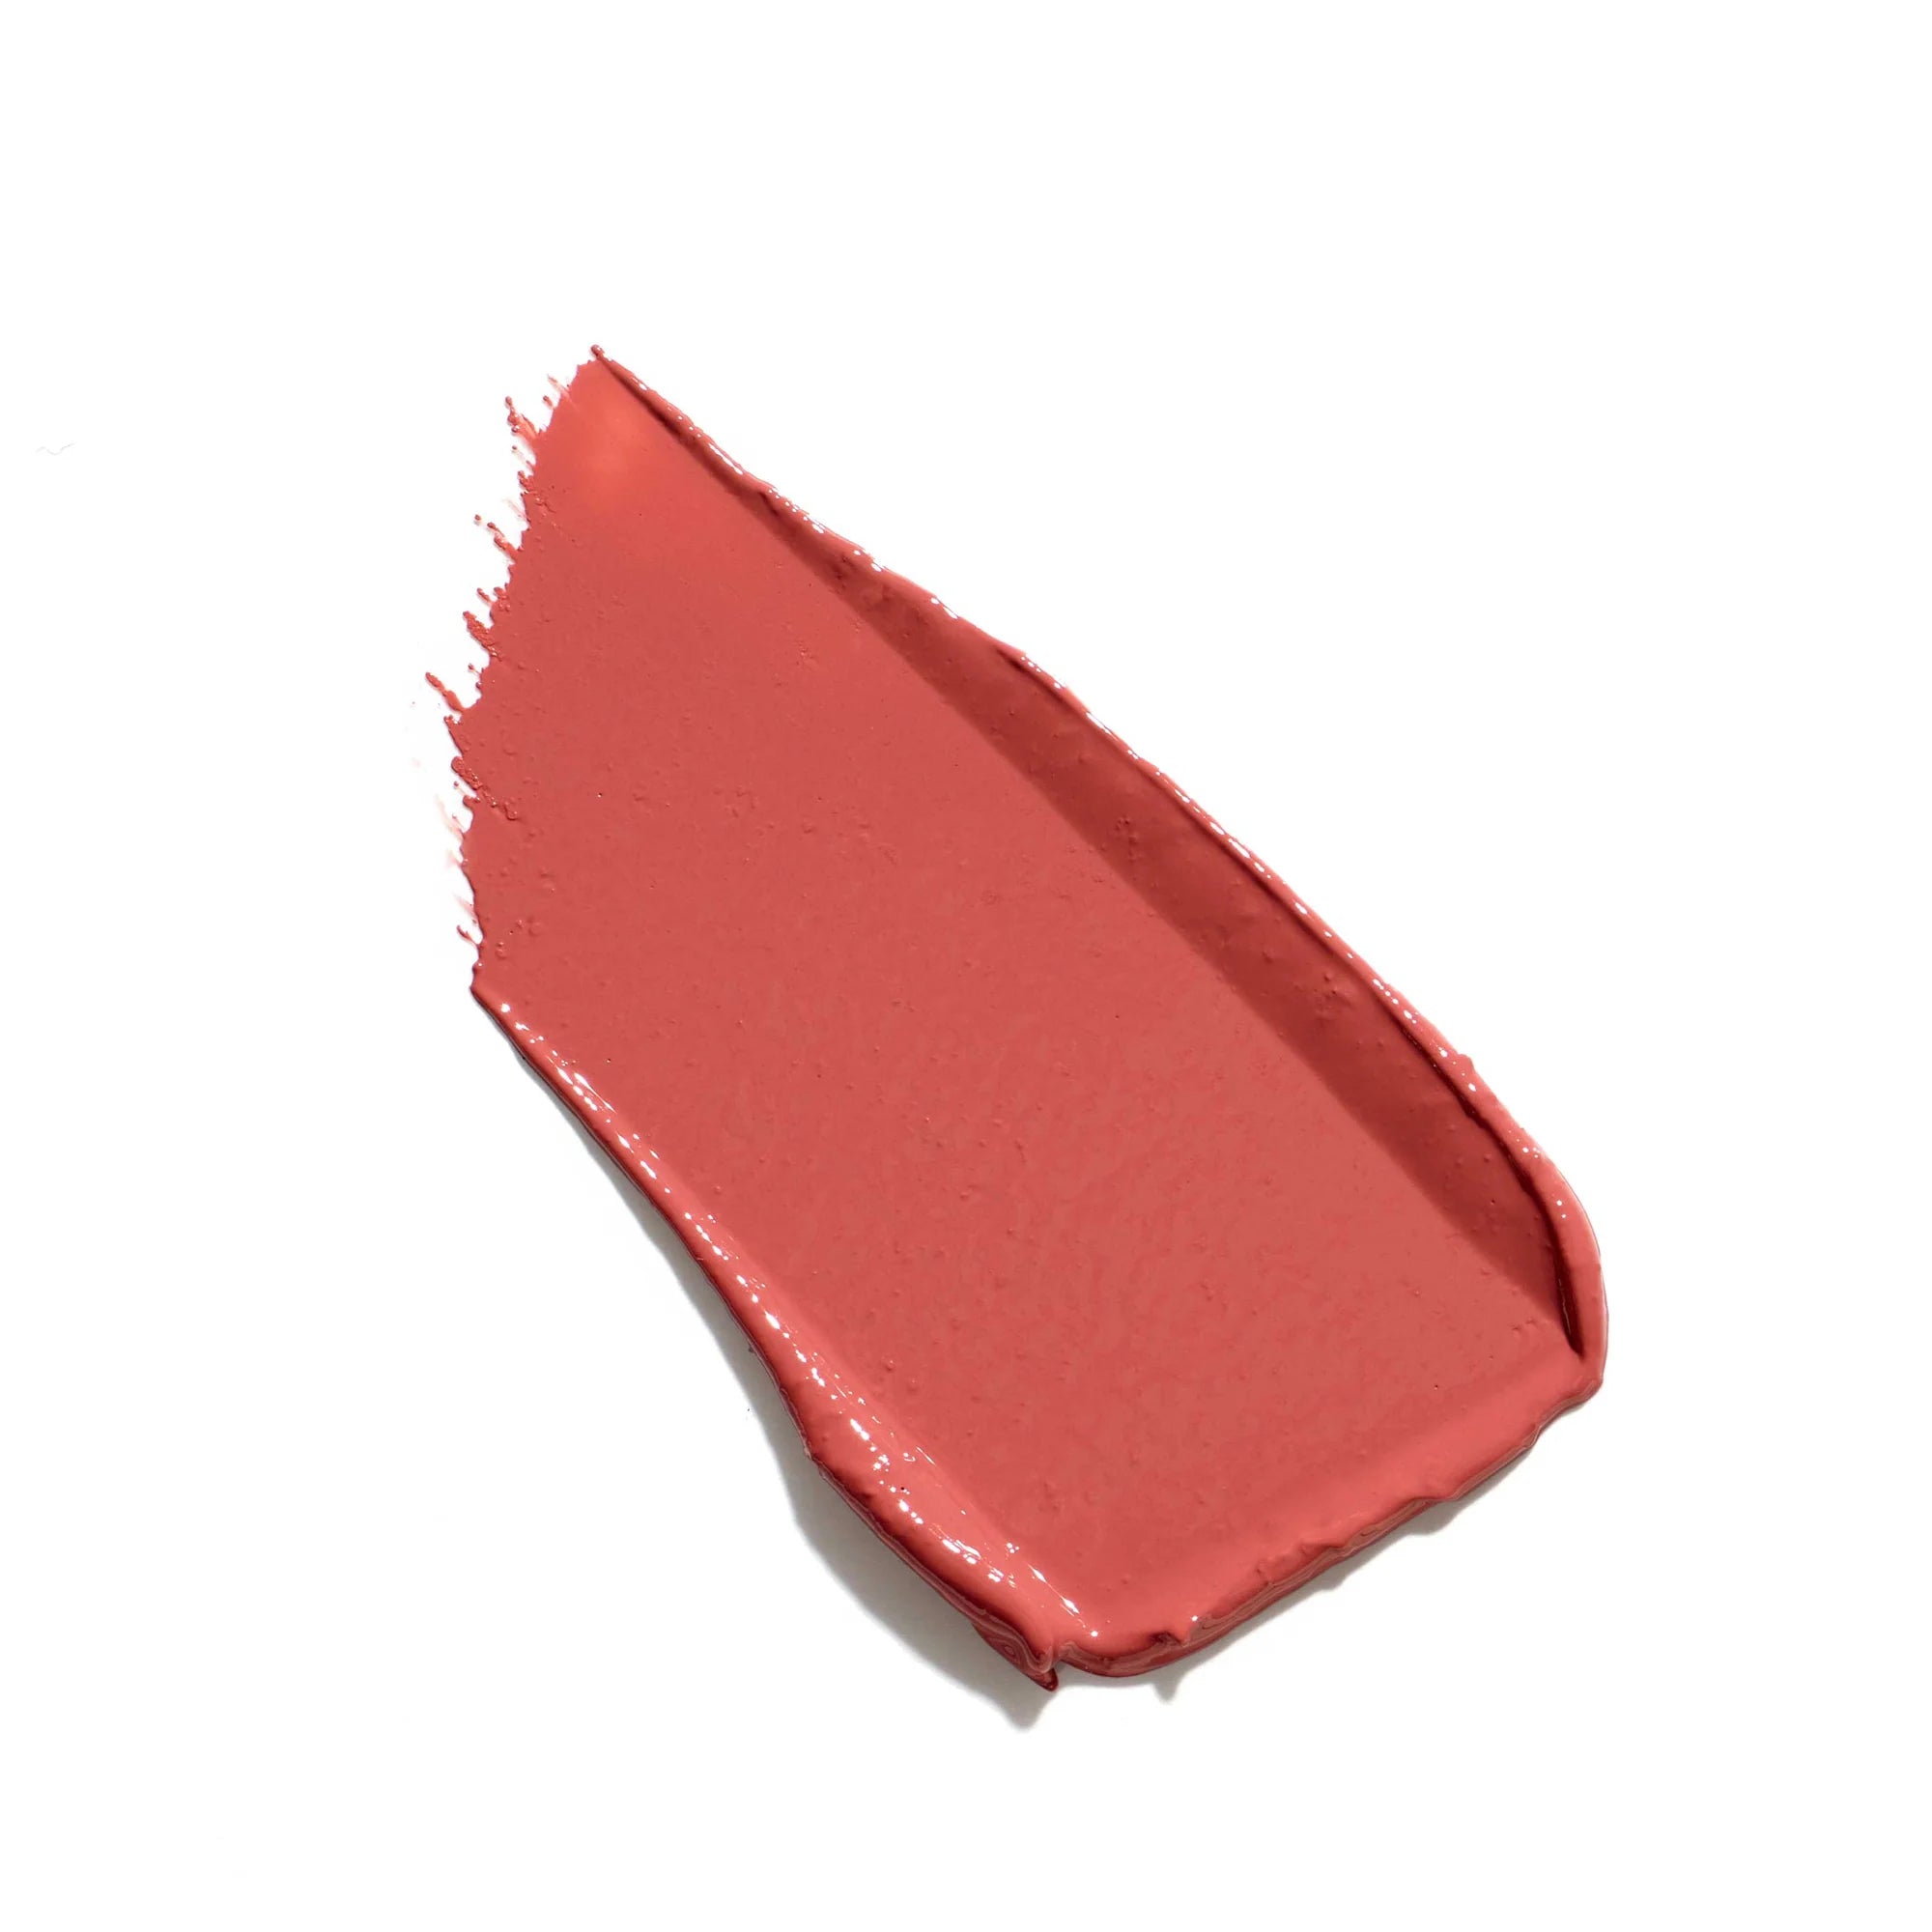 Jane Iredale's ColorLuxe Hydrating Cream Lipstick - swatch and color Sorbet - warm medium soft coral